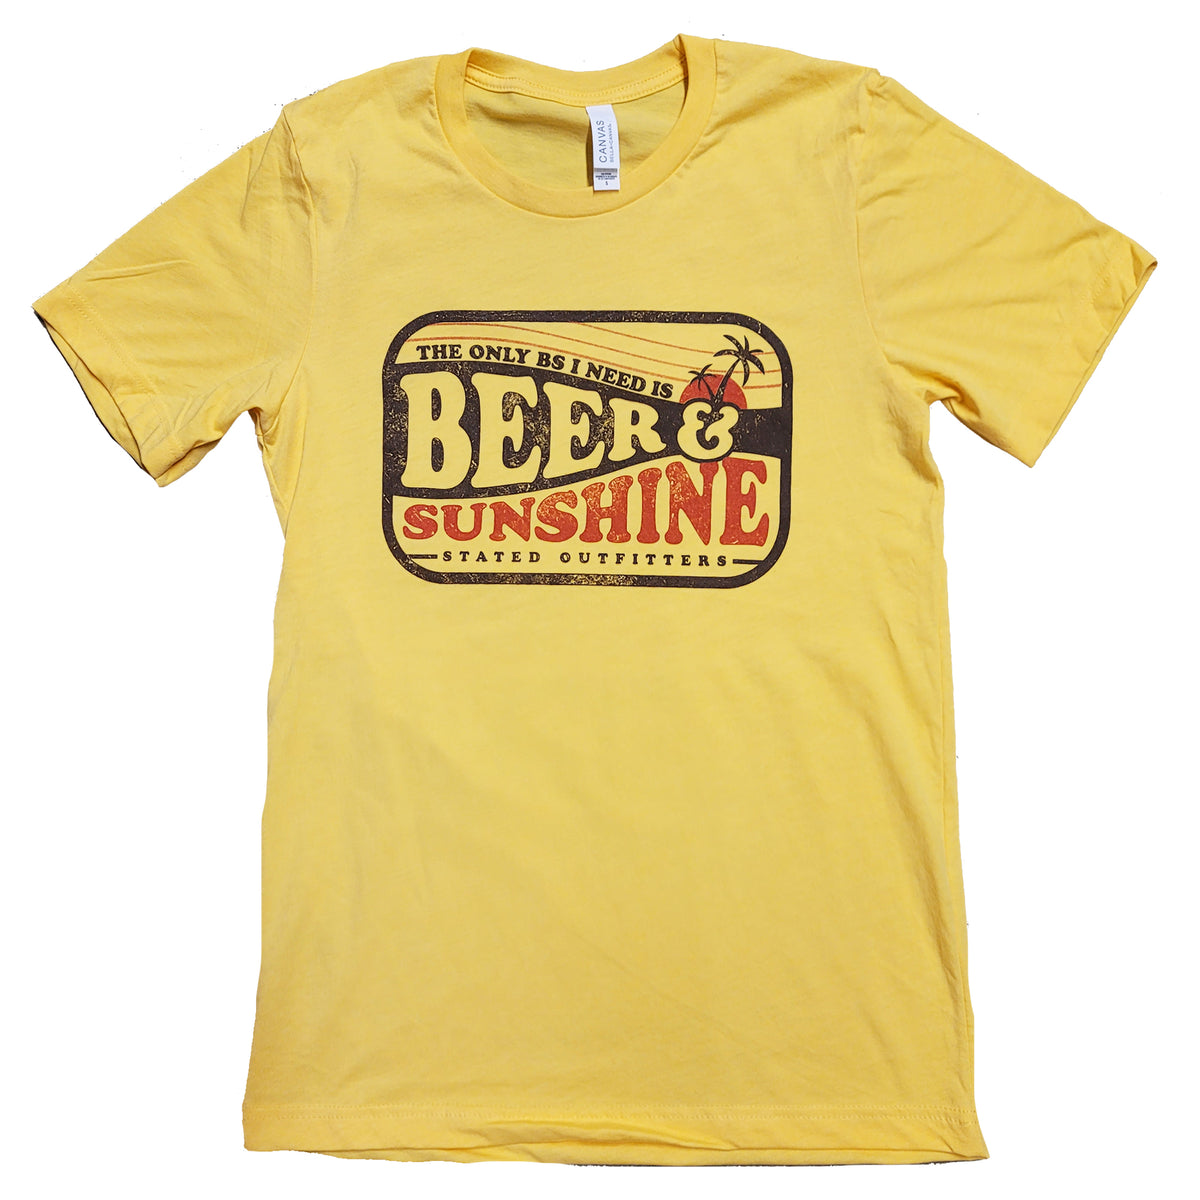 Stated Outfitters Beer and Sunshine Tee